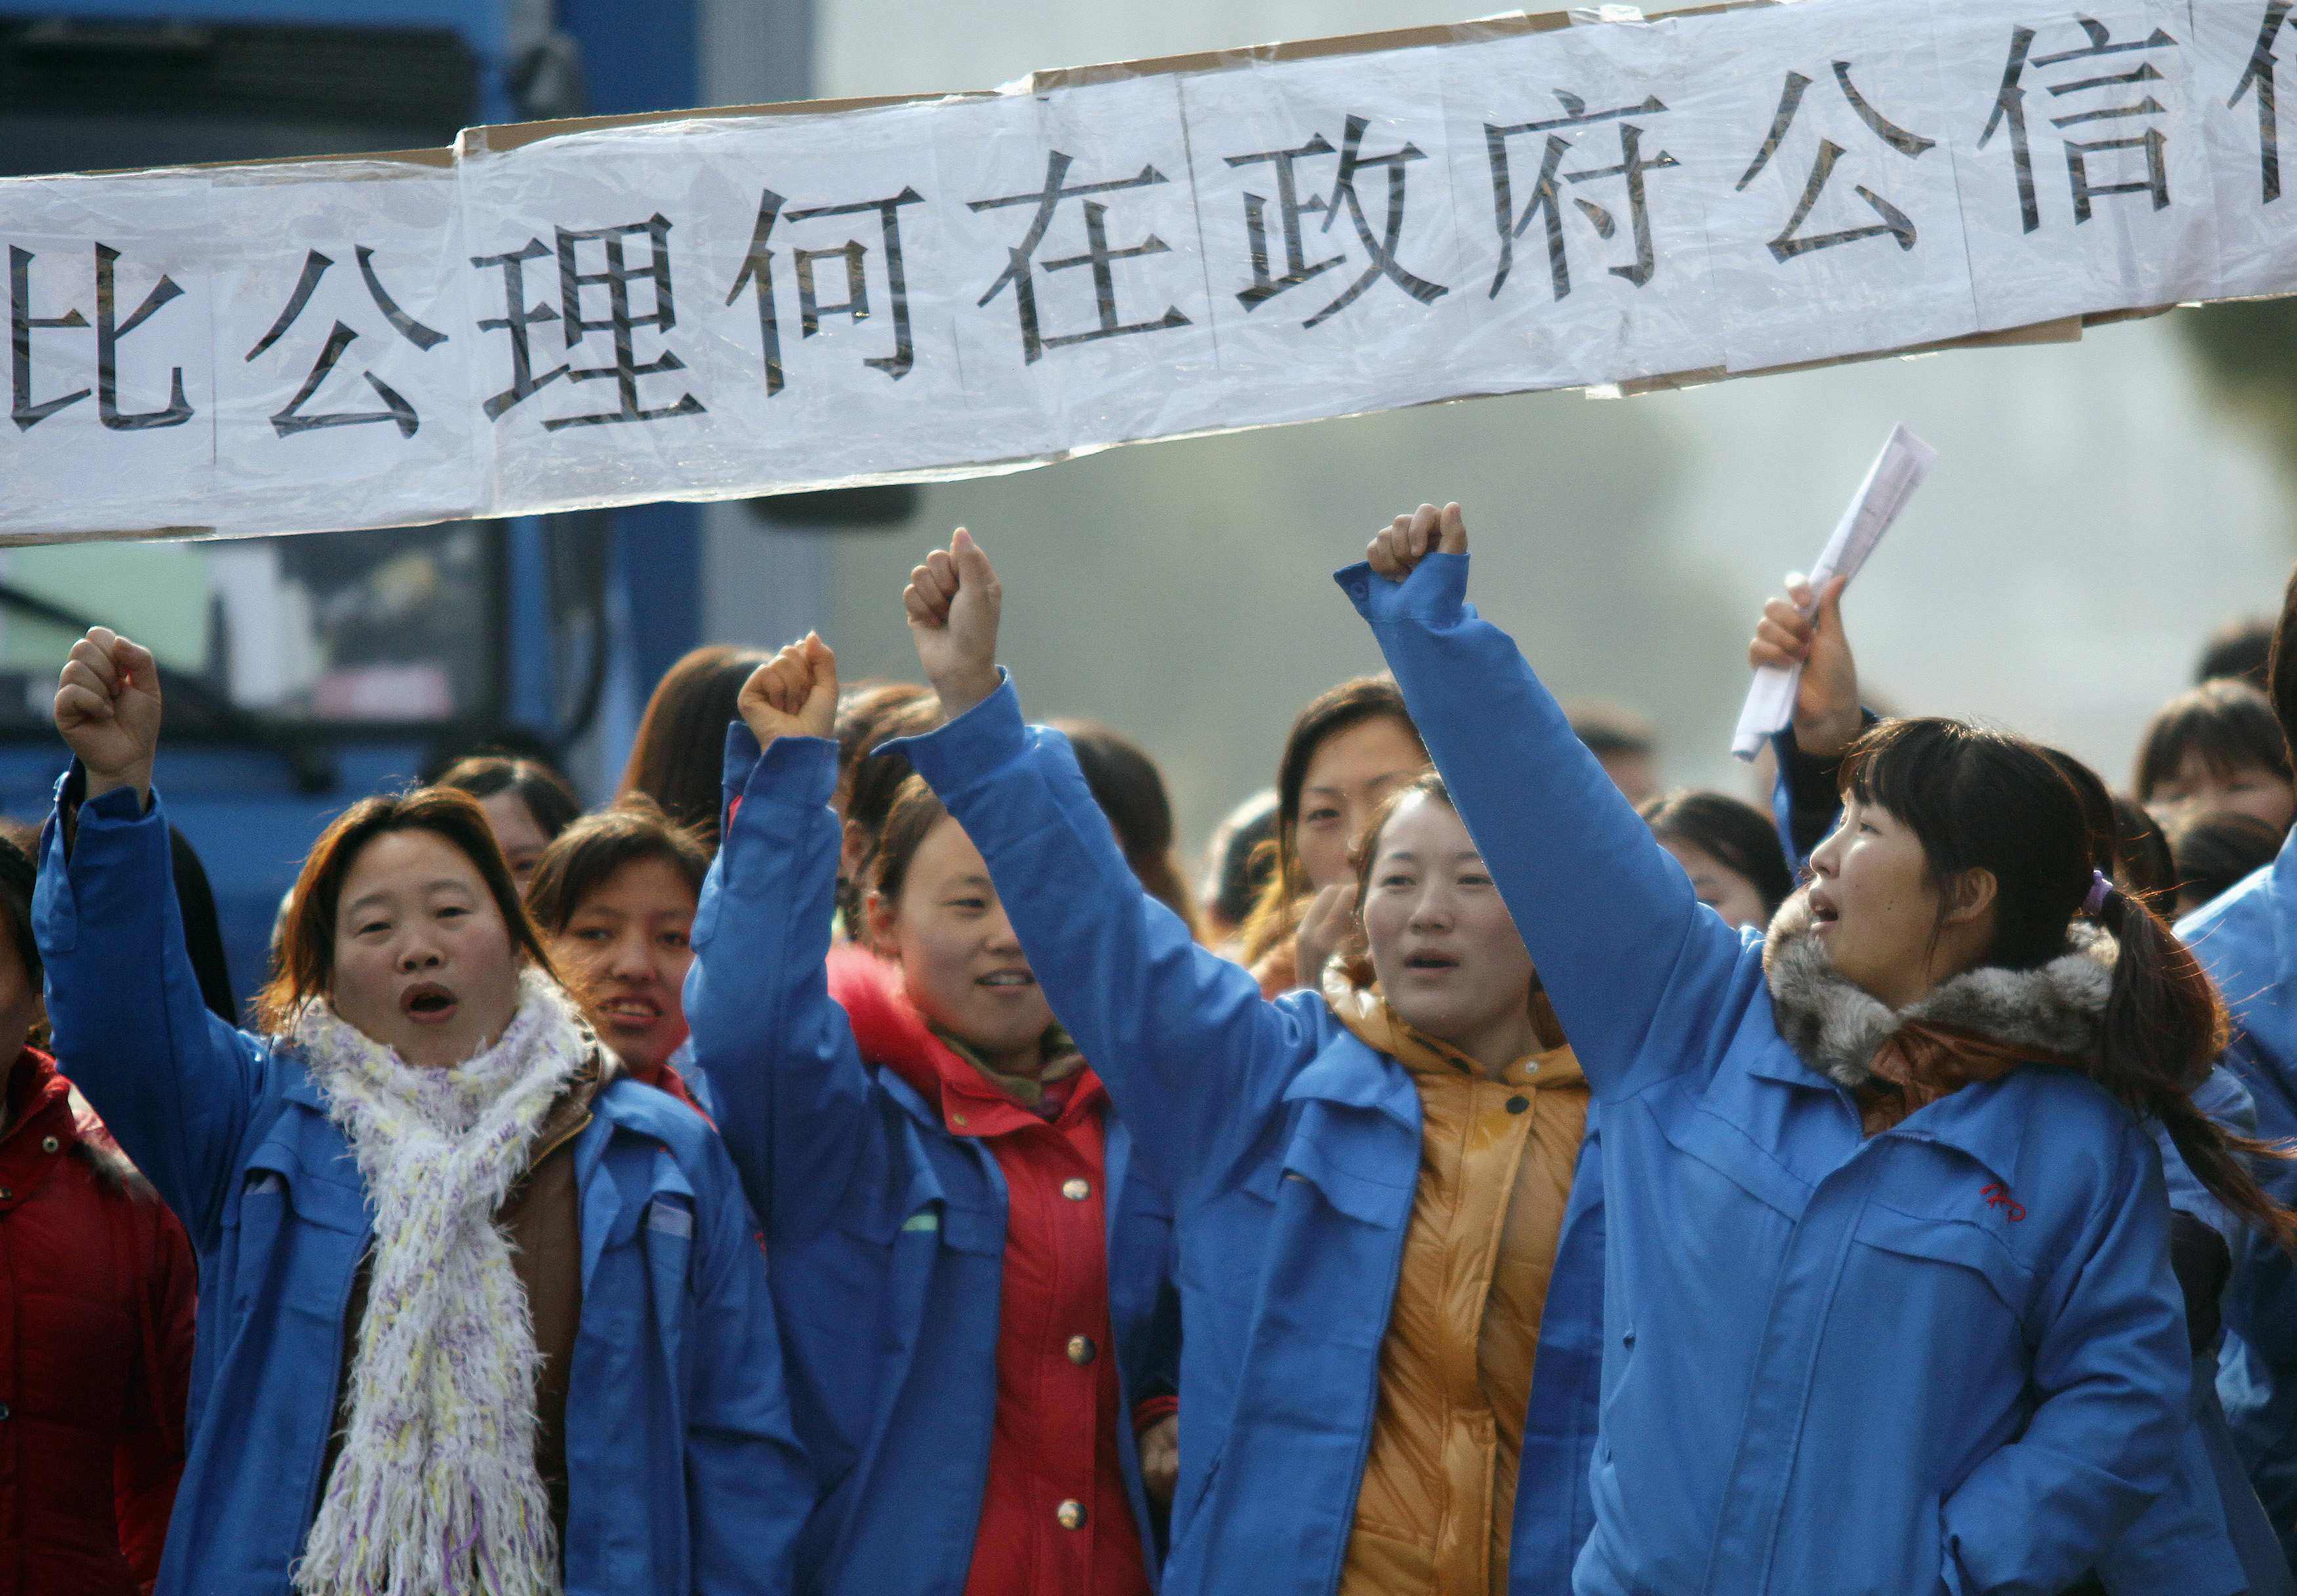 Striking workers hold a banner asking, among other things, how they can trust the government, as they protest against planned lay-offs at a factory in Shanghai on December 2, 2011. Photo: Reuters